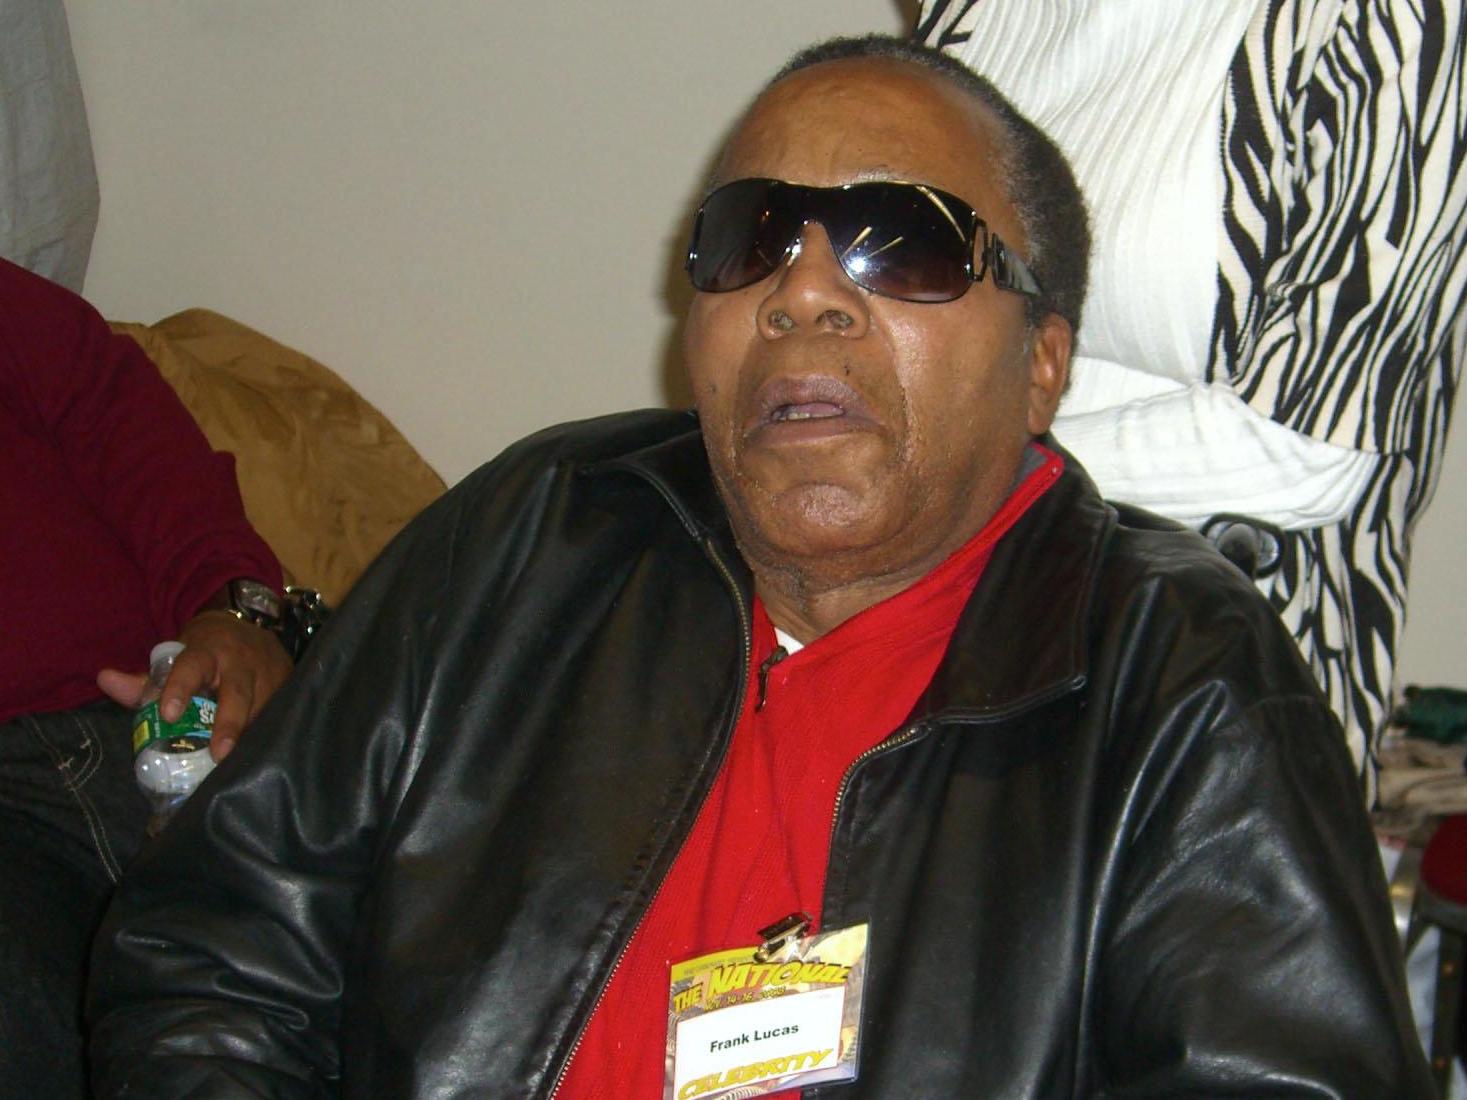 Frank Lucas death: Infamous drug kingpin portrayed in 'American